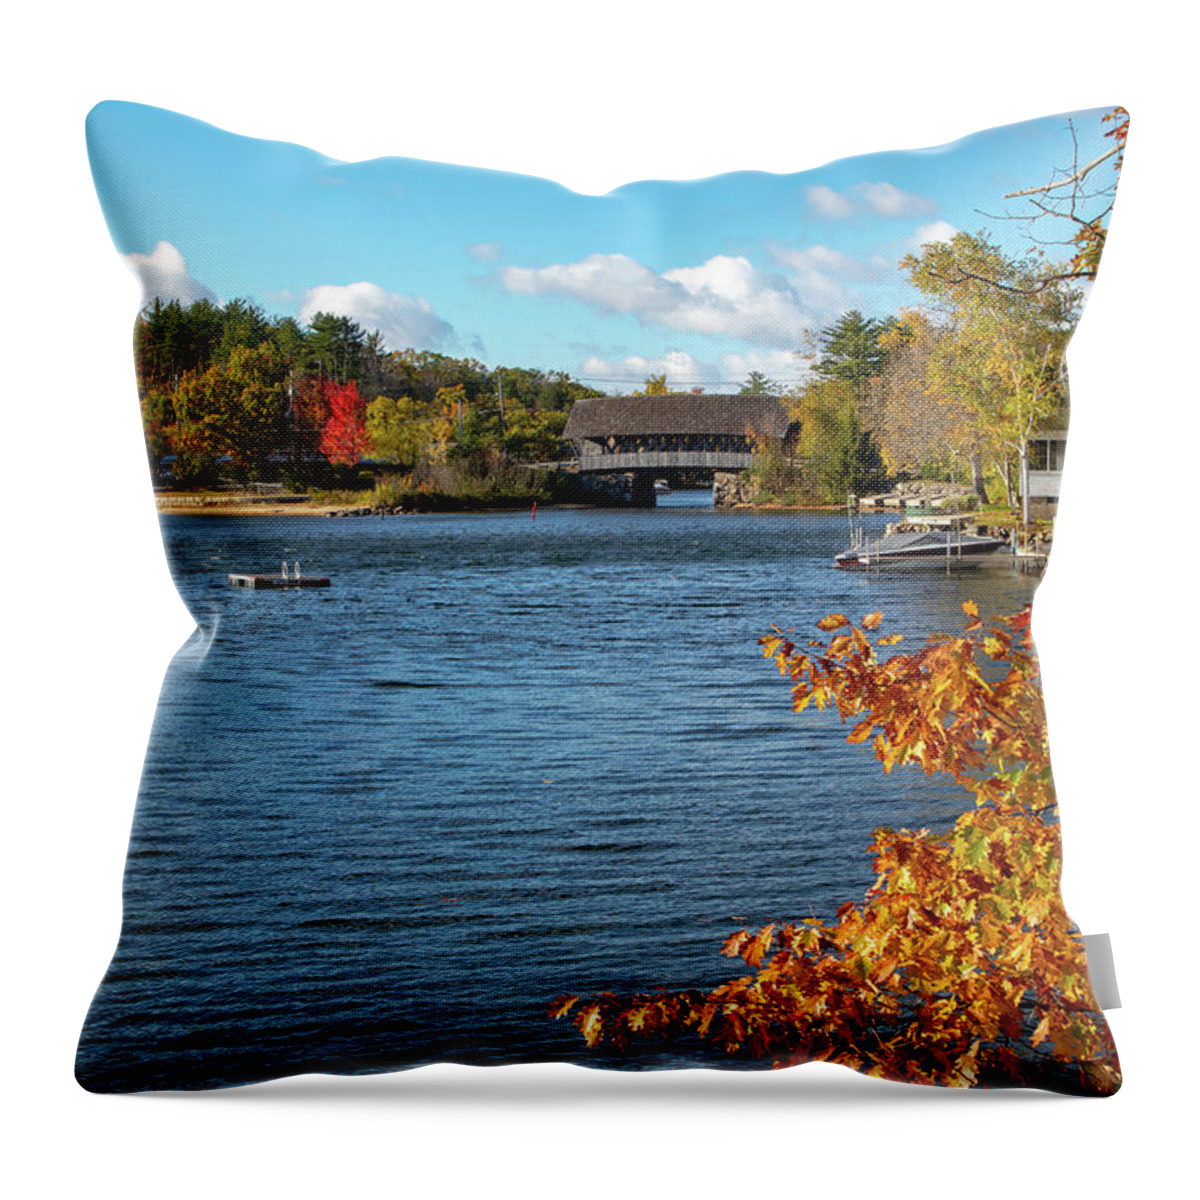 Ashland New Hampshire Throw Pillow featuring the photograph Squam River Covered Bridge by Jeff Folger